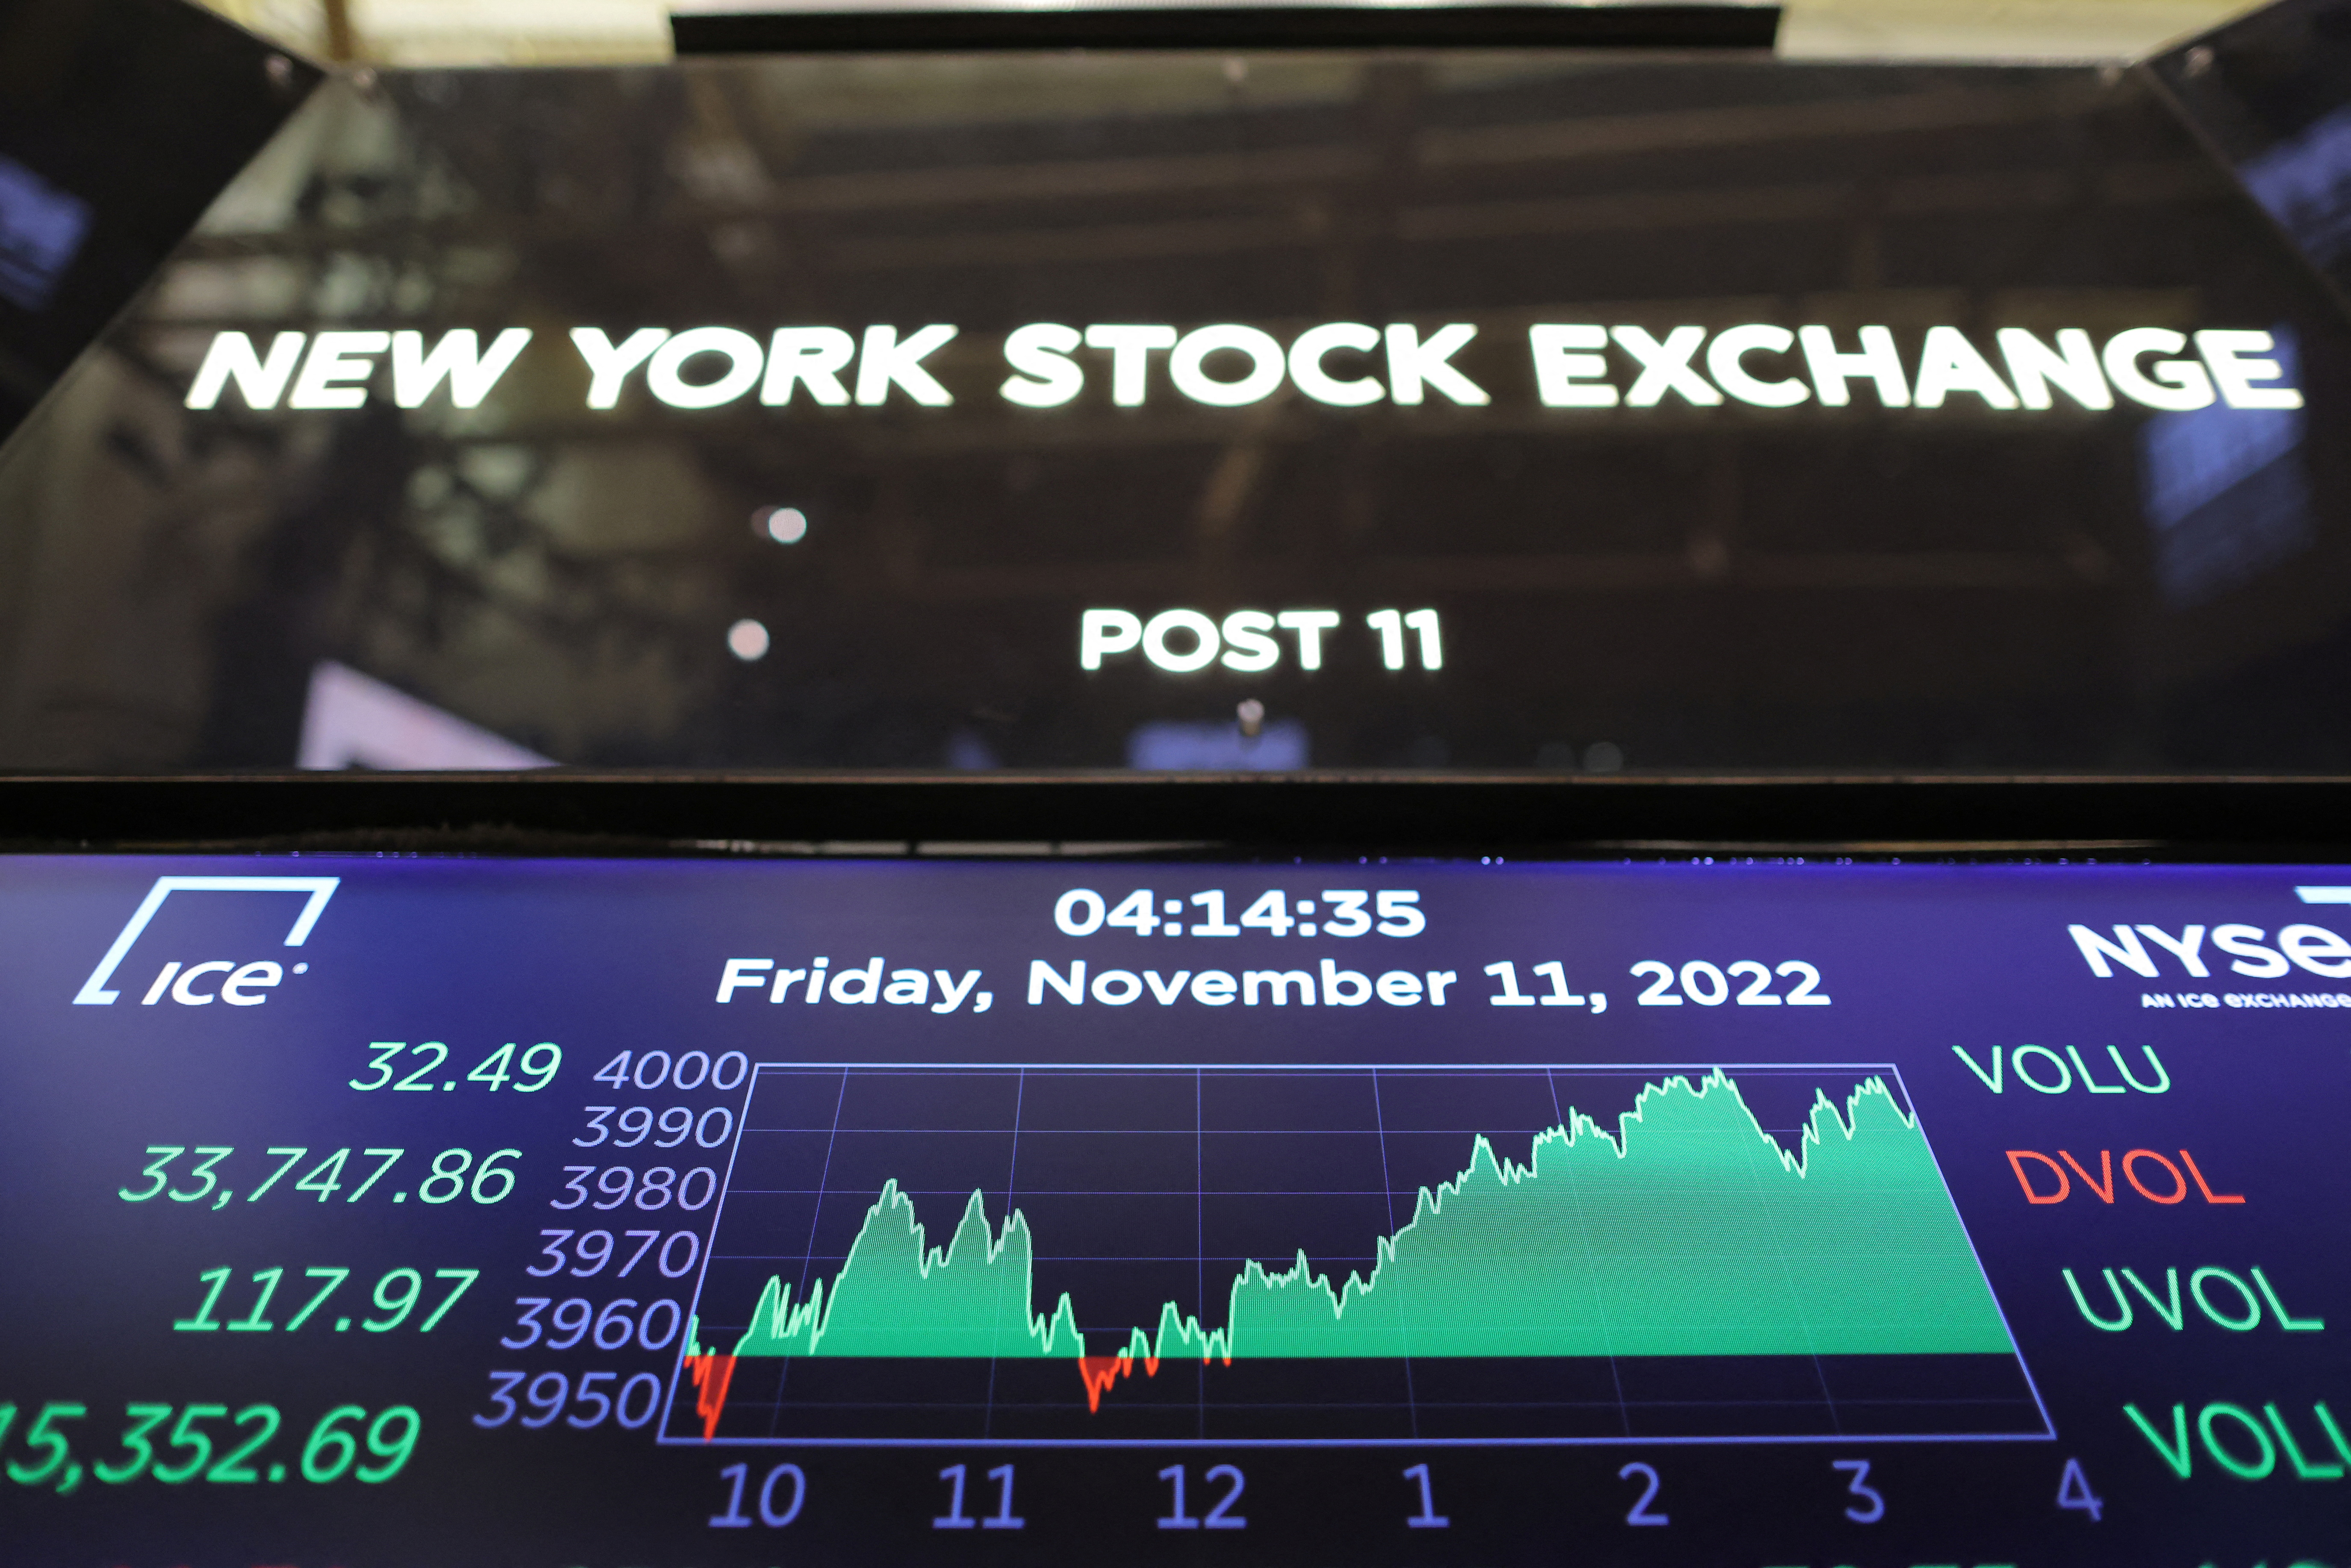 The Dow Jones Industrial Average (DJI) is seen after the market close on the trading floor at the New York Stock Exchange (NYSE) in Manhattan, New York City